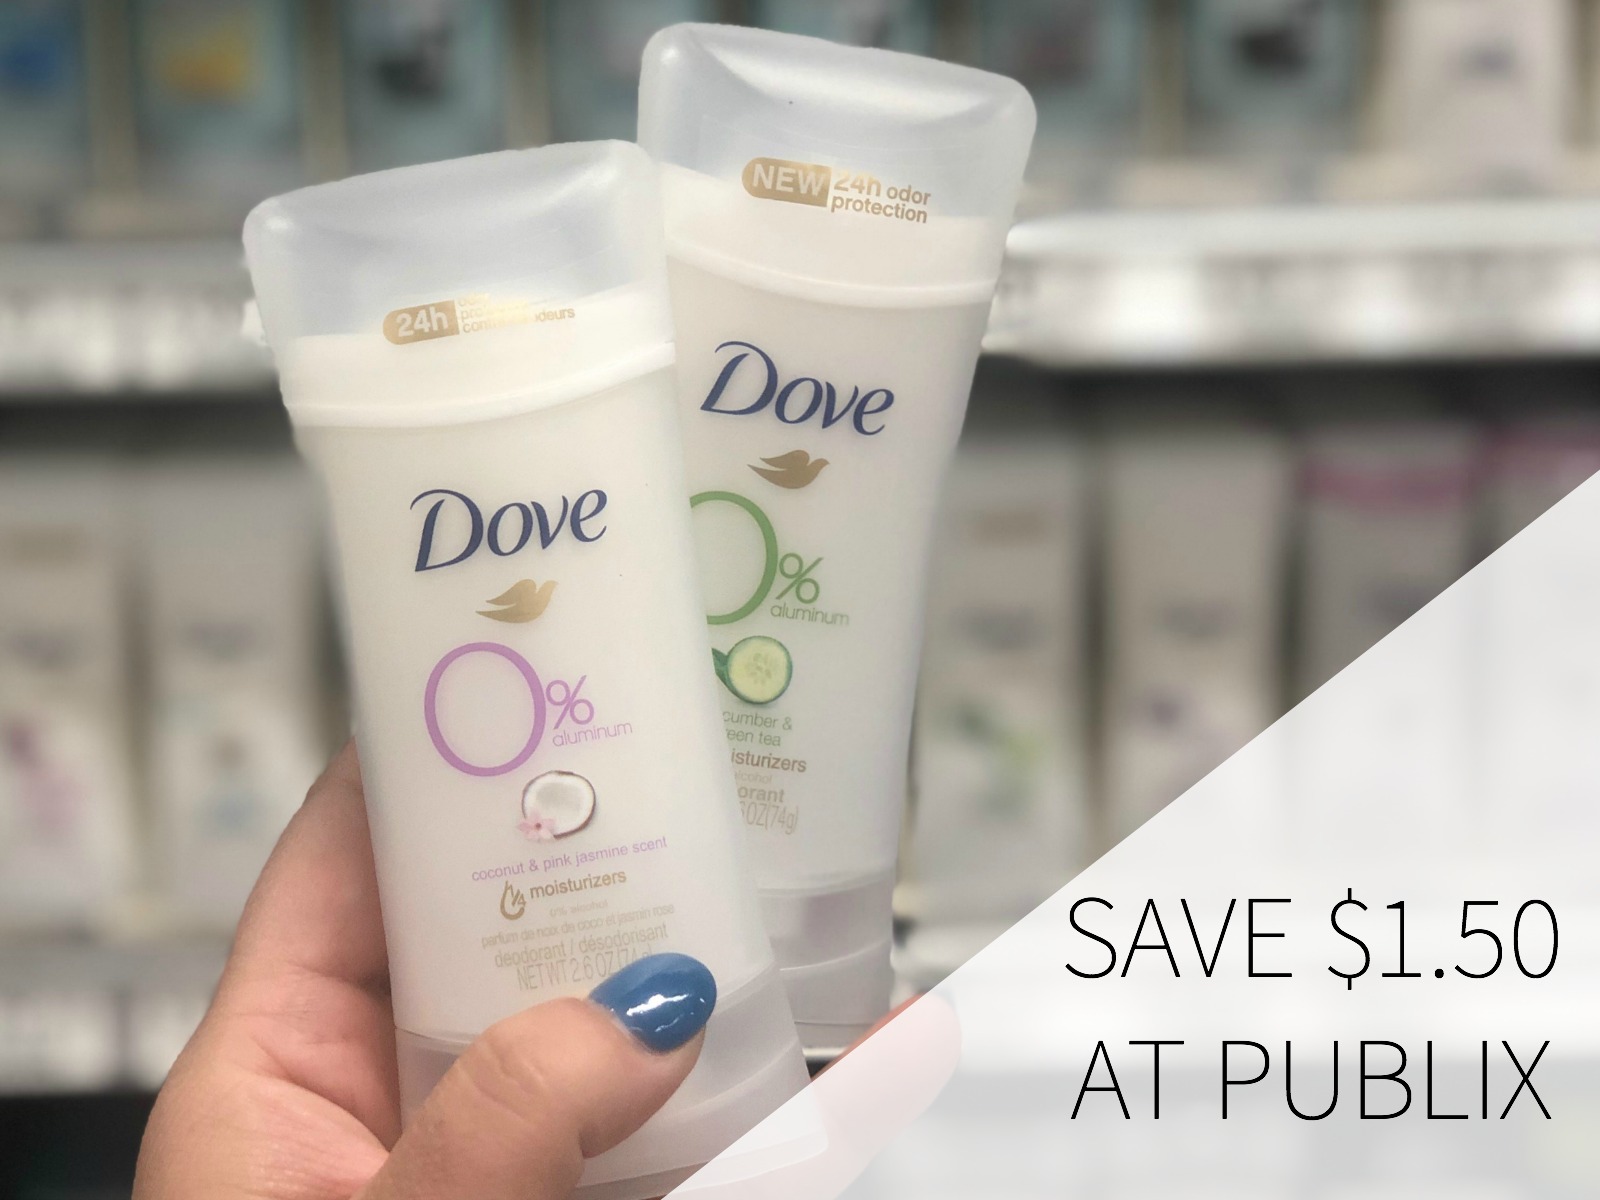 Save $1.50 On Your Purchase Of Dove 0% Aluminum Deodorant Right Now At Publix on I Heart Publix 1